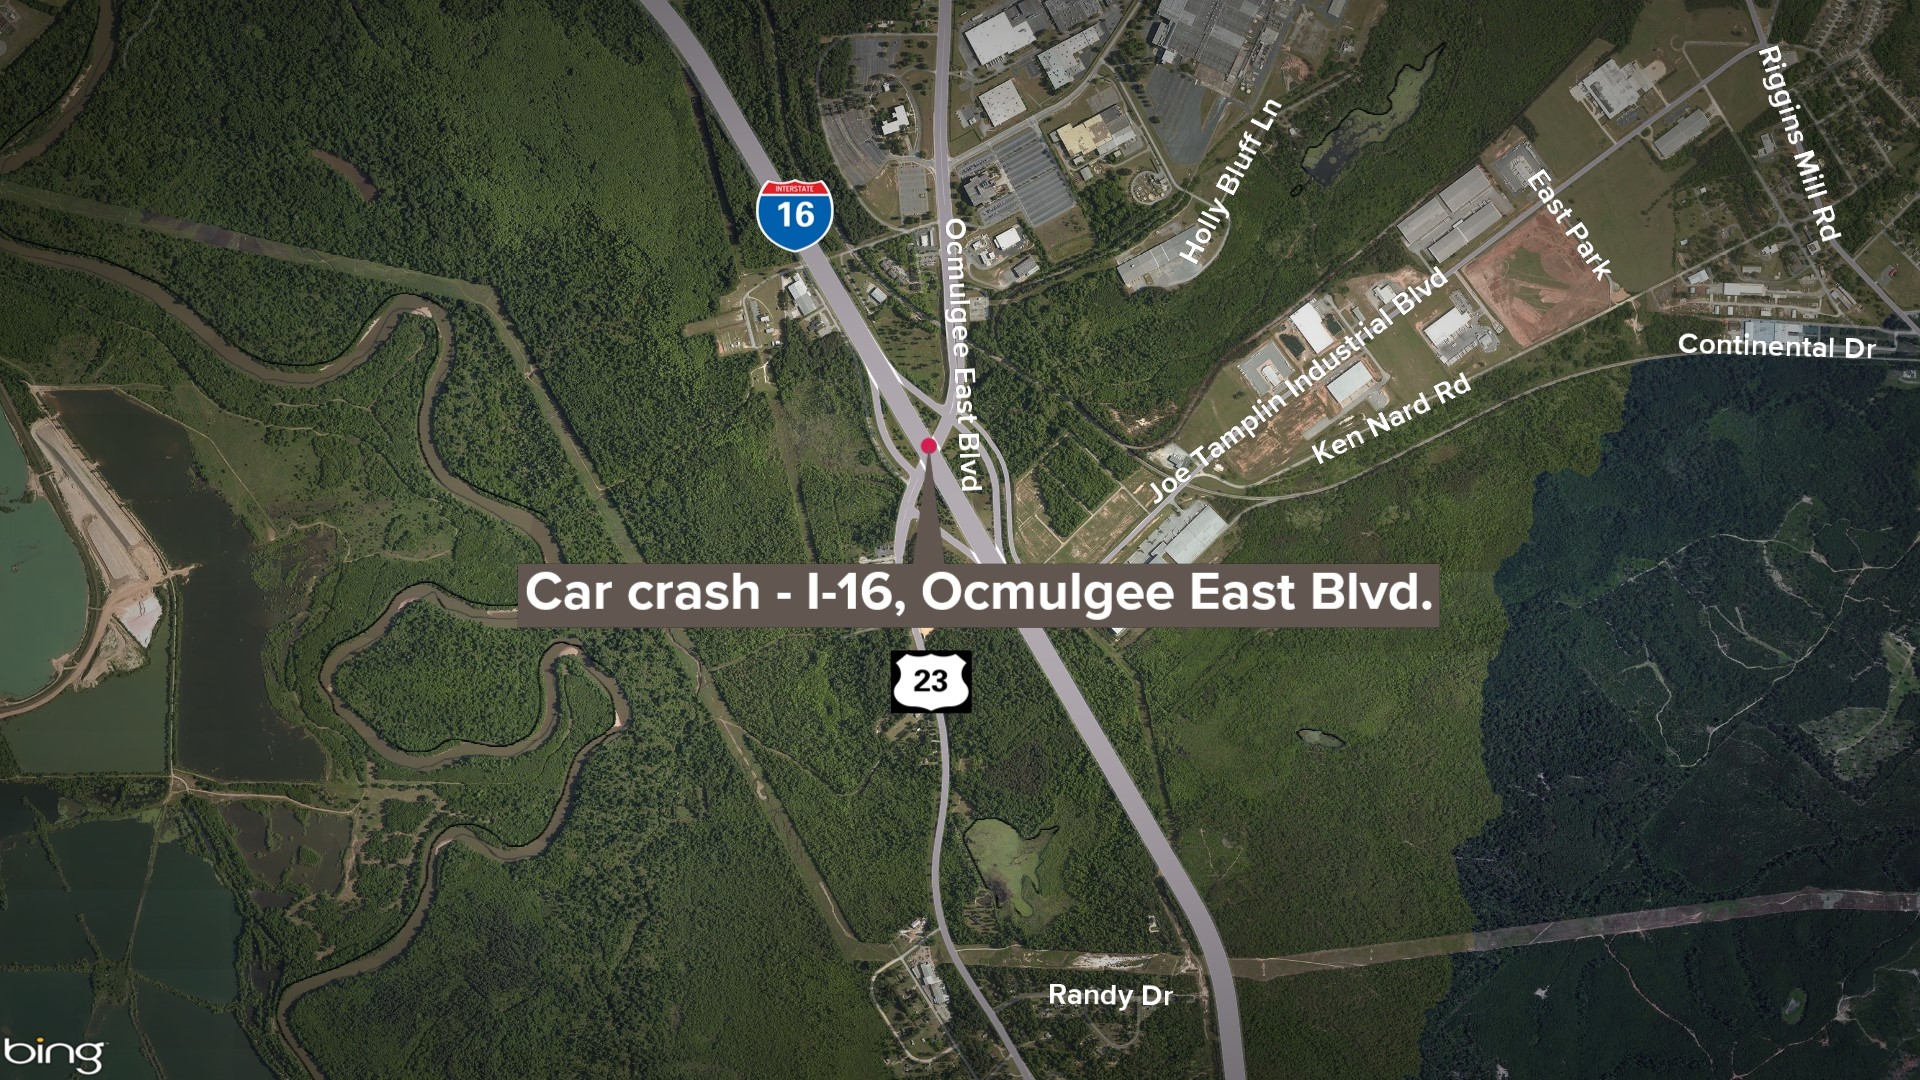 A husband and wife were in a single-car accident early Friday morning.